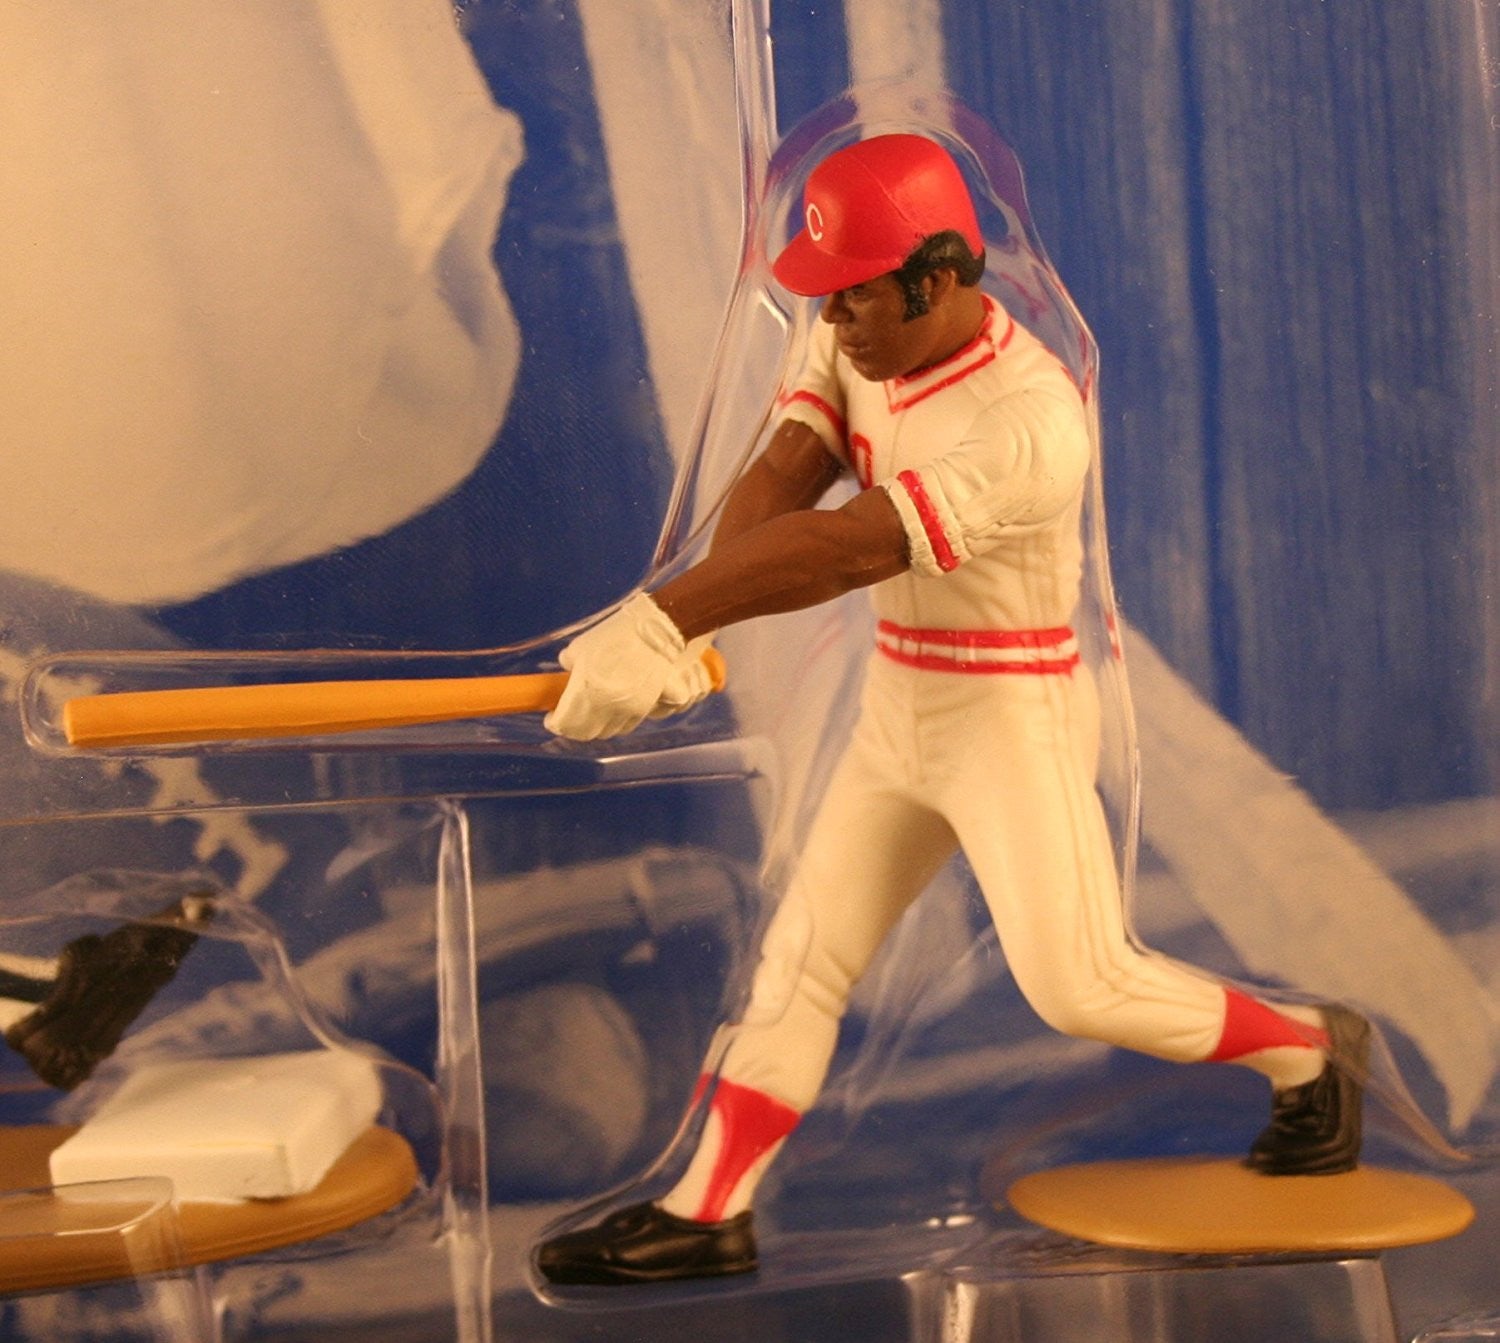 KEN GRIFFEY JR. / SEATTLE MARINERS & KEN GRIFFEY SR. / CINCINNATi REDS 1997 MLB Classic Doubles * Winning Pairs Series * Starting Lineup Action Figures & Exclusive Collector Trading Cards